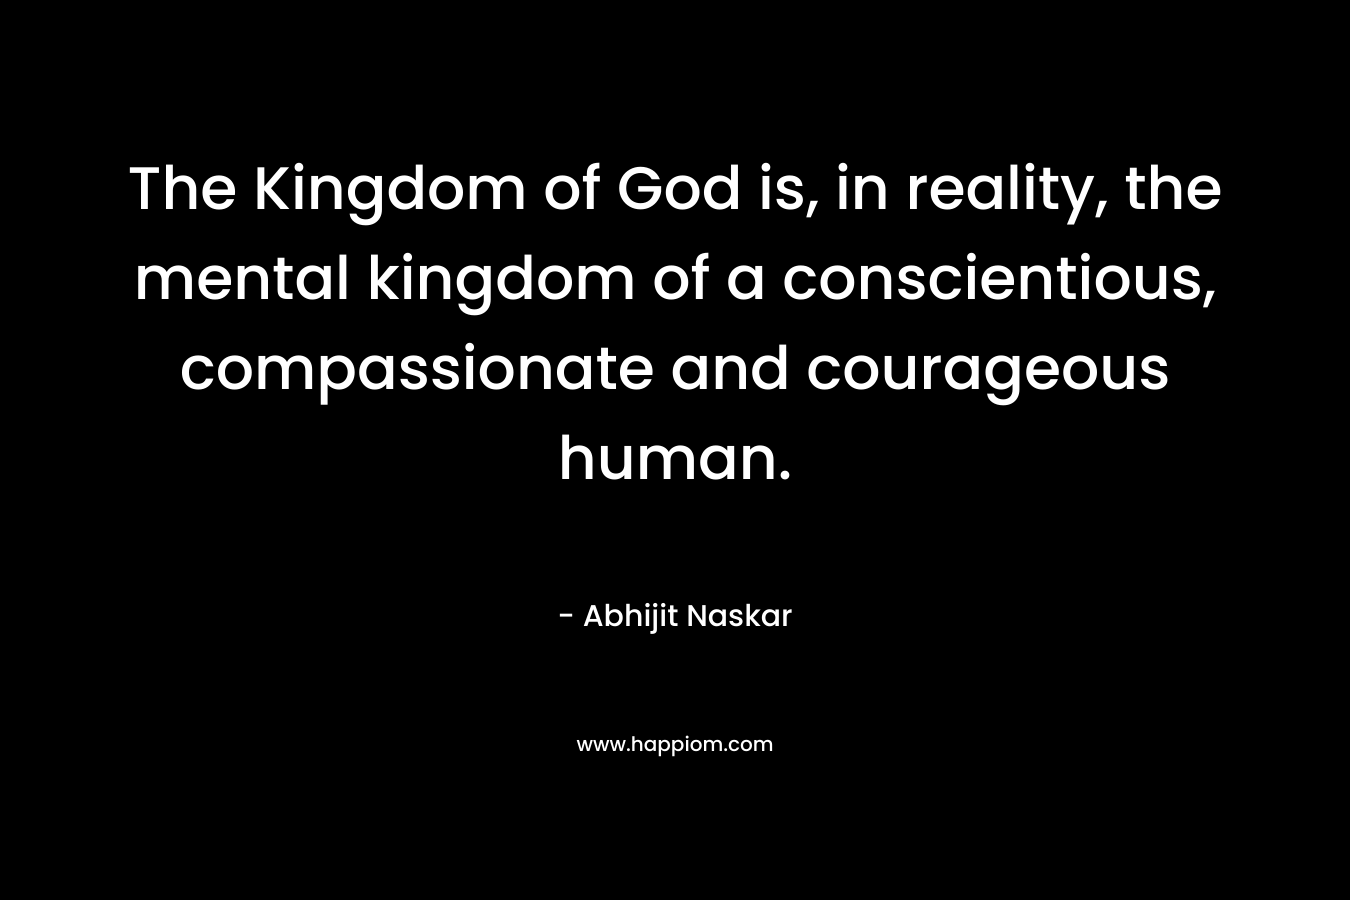 The Kingdom of God is, in reality, the mental kingdom of a conscientious, compassionate and courageous human.